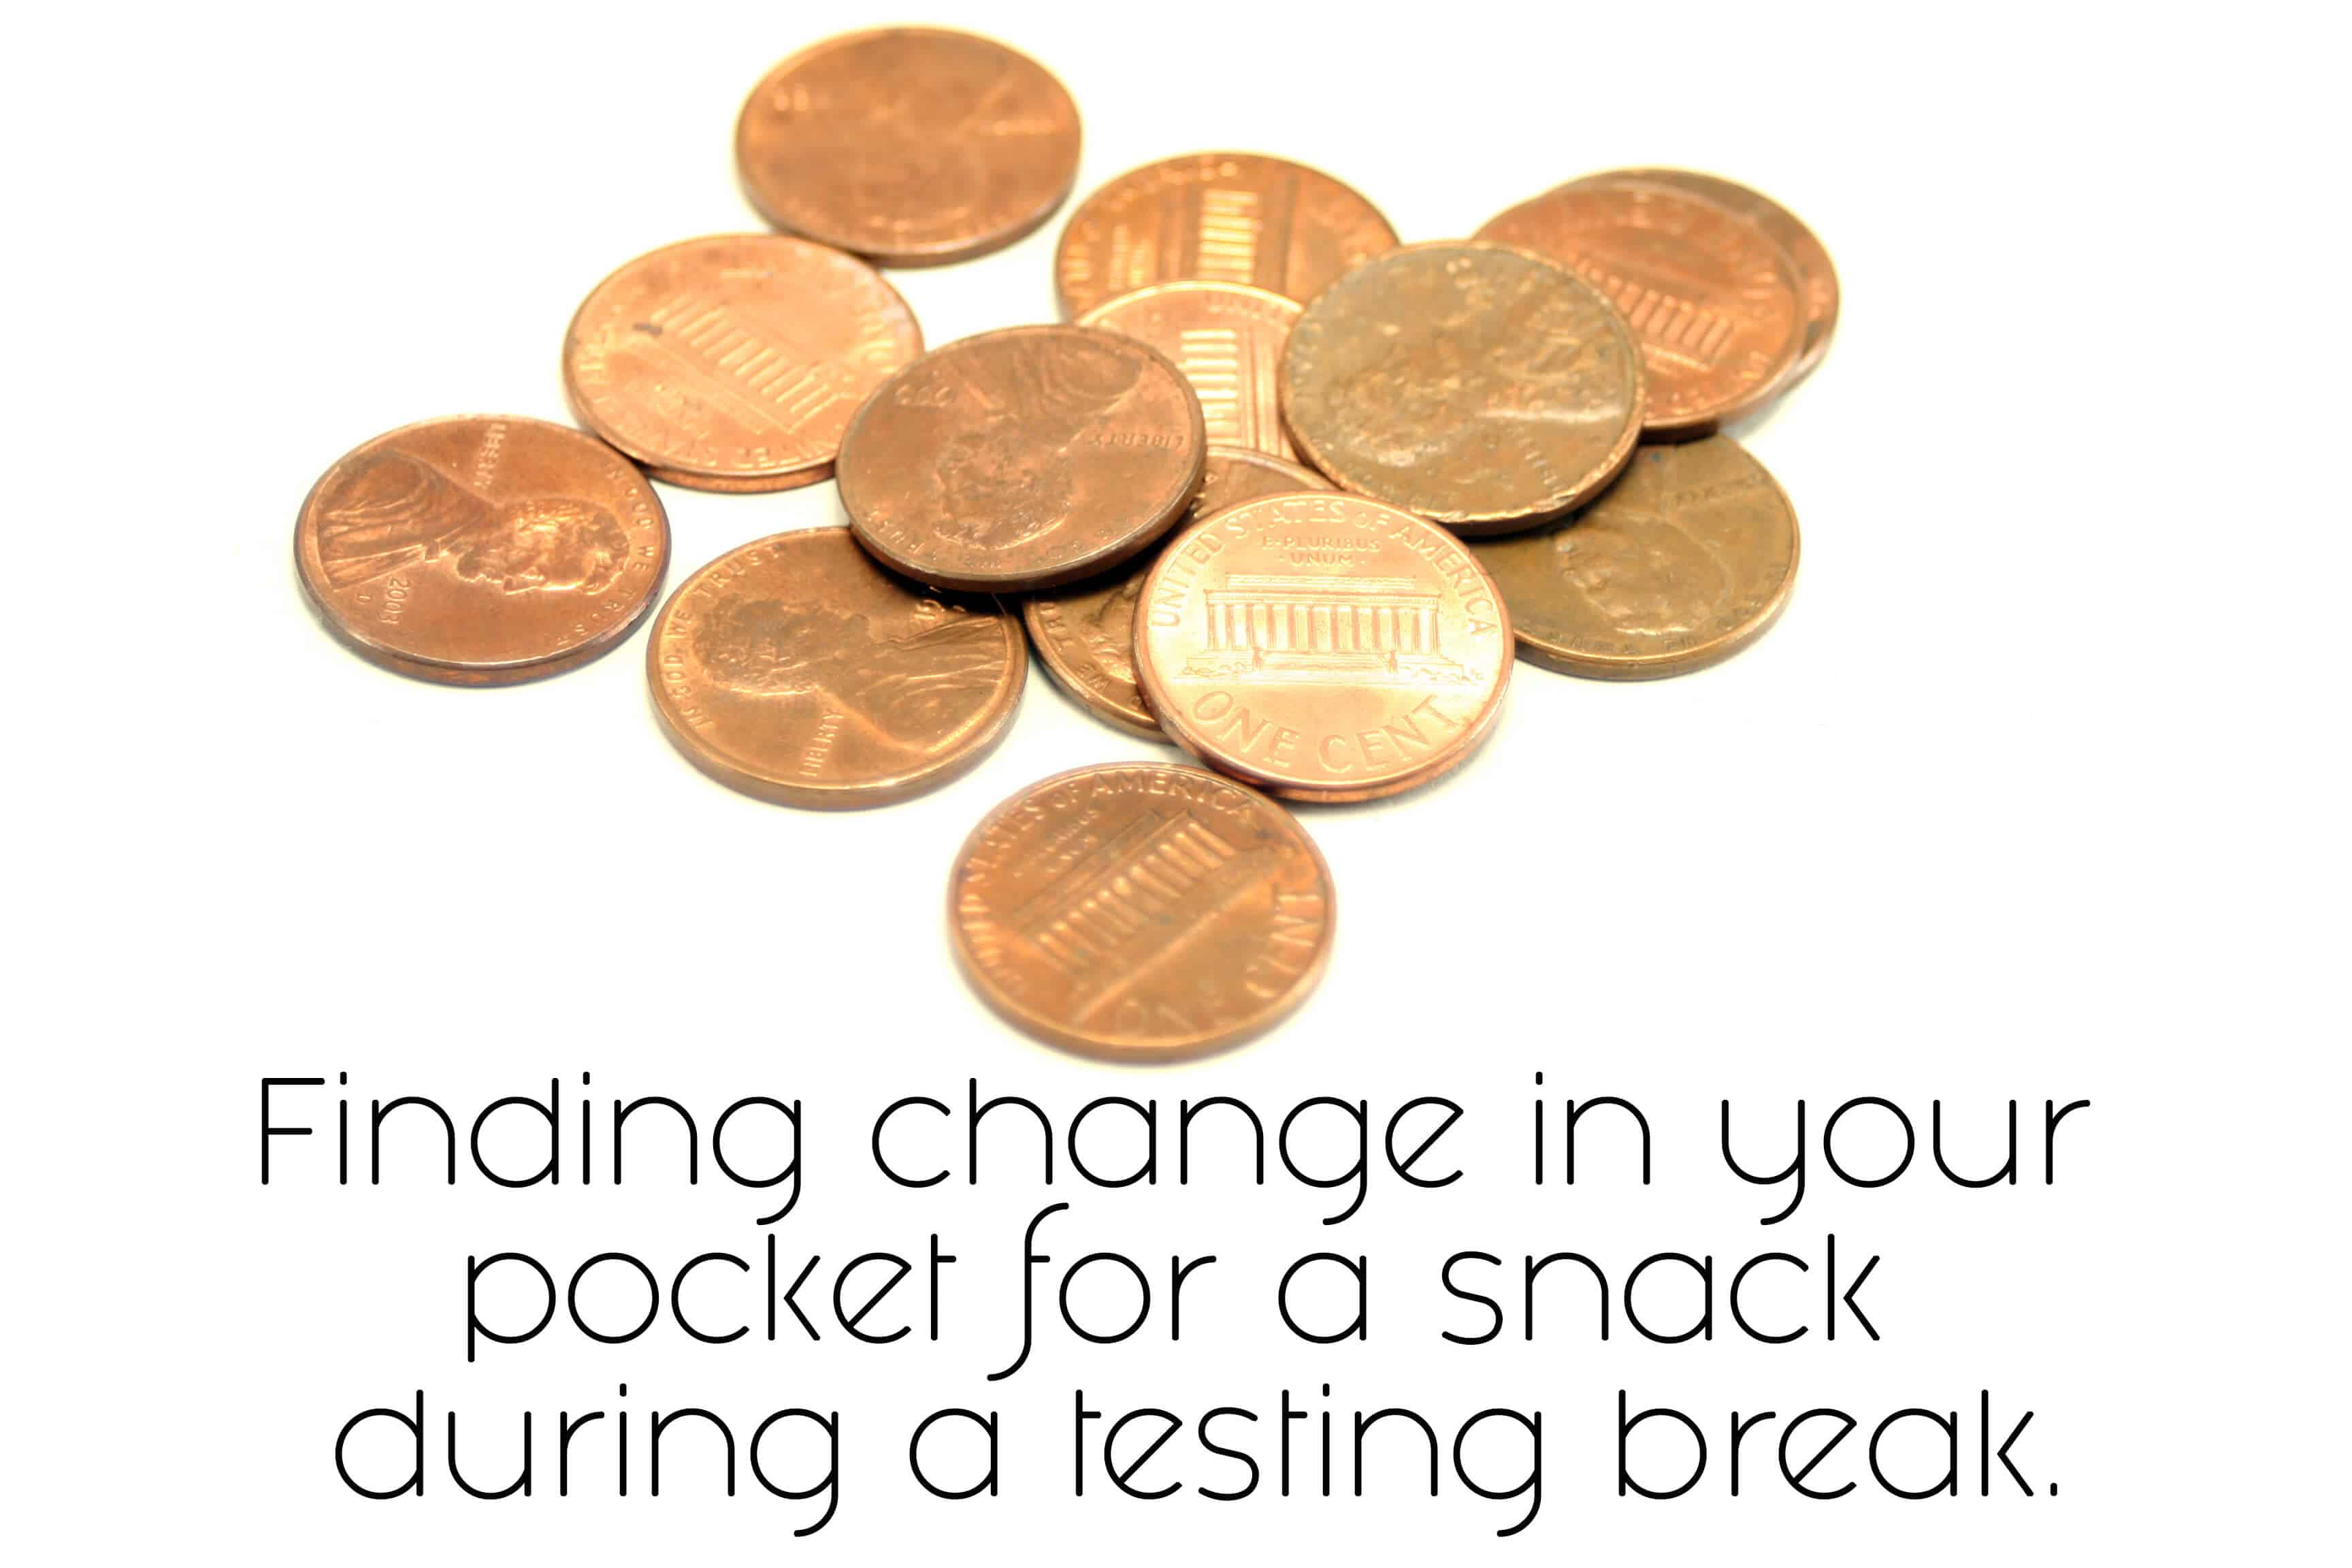 Finding change in your pocket for a snack during a testing break.